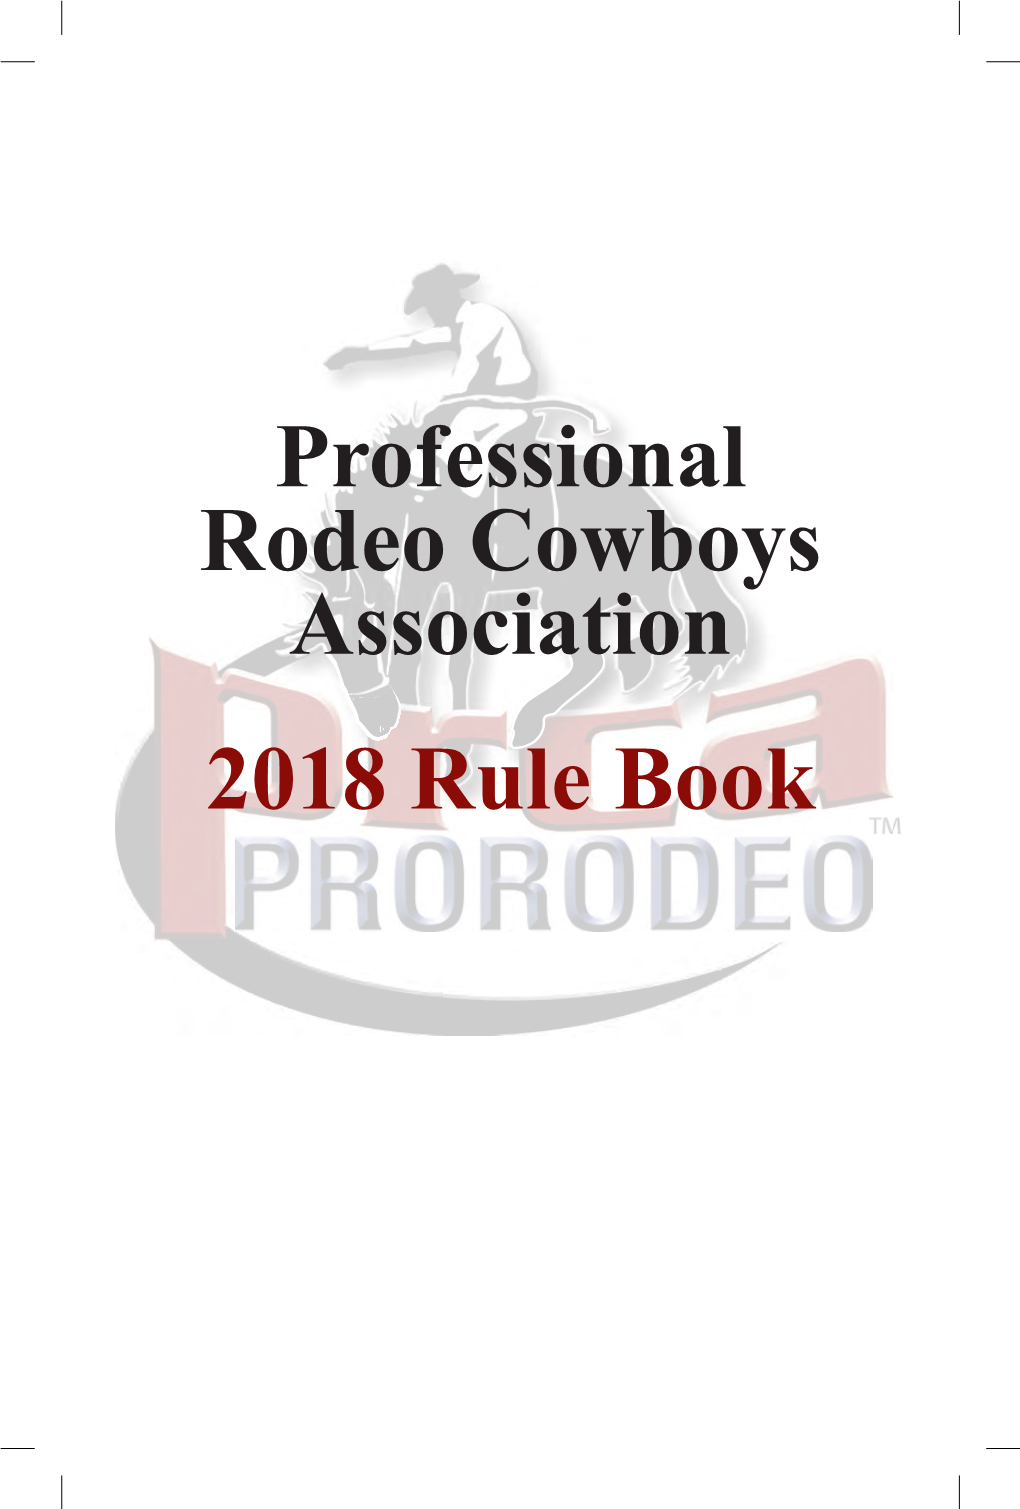 Professional Rodeo Cowboys Association 2018 Rule Book